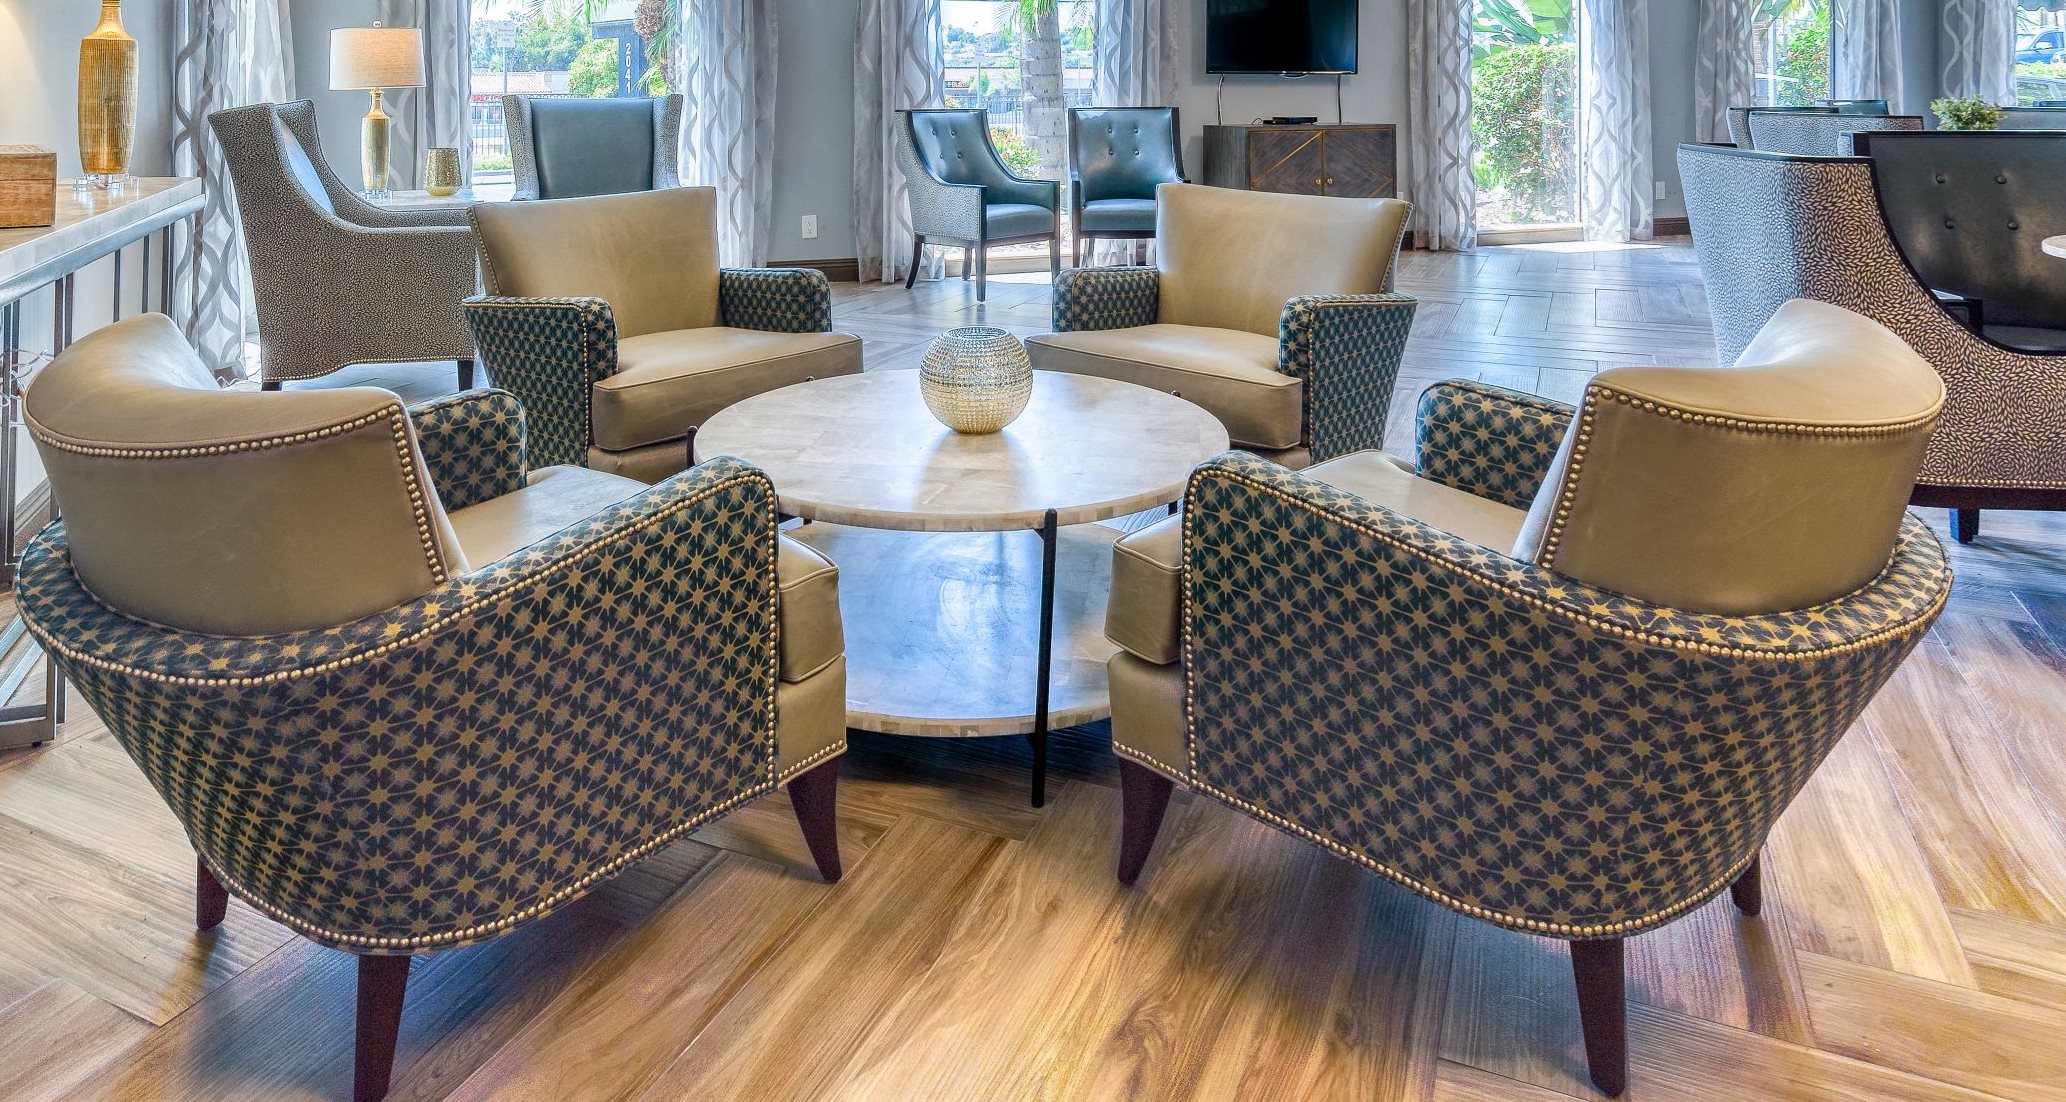 Relax and enjoy yourself at Pacifica Senior Living Alta Vista